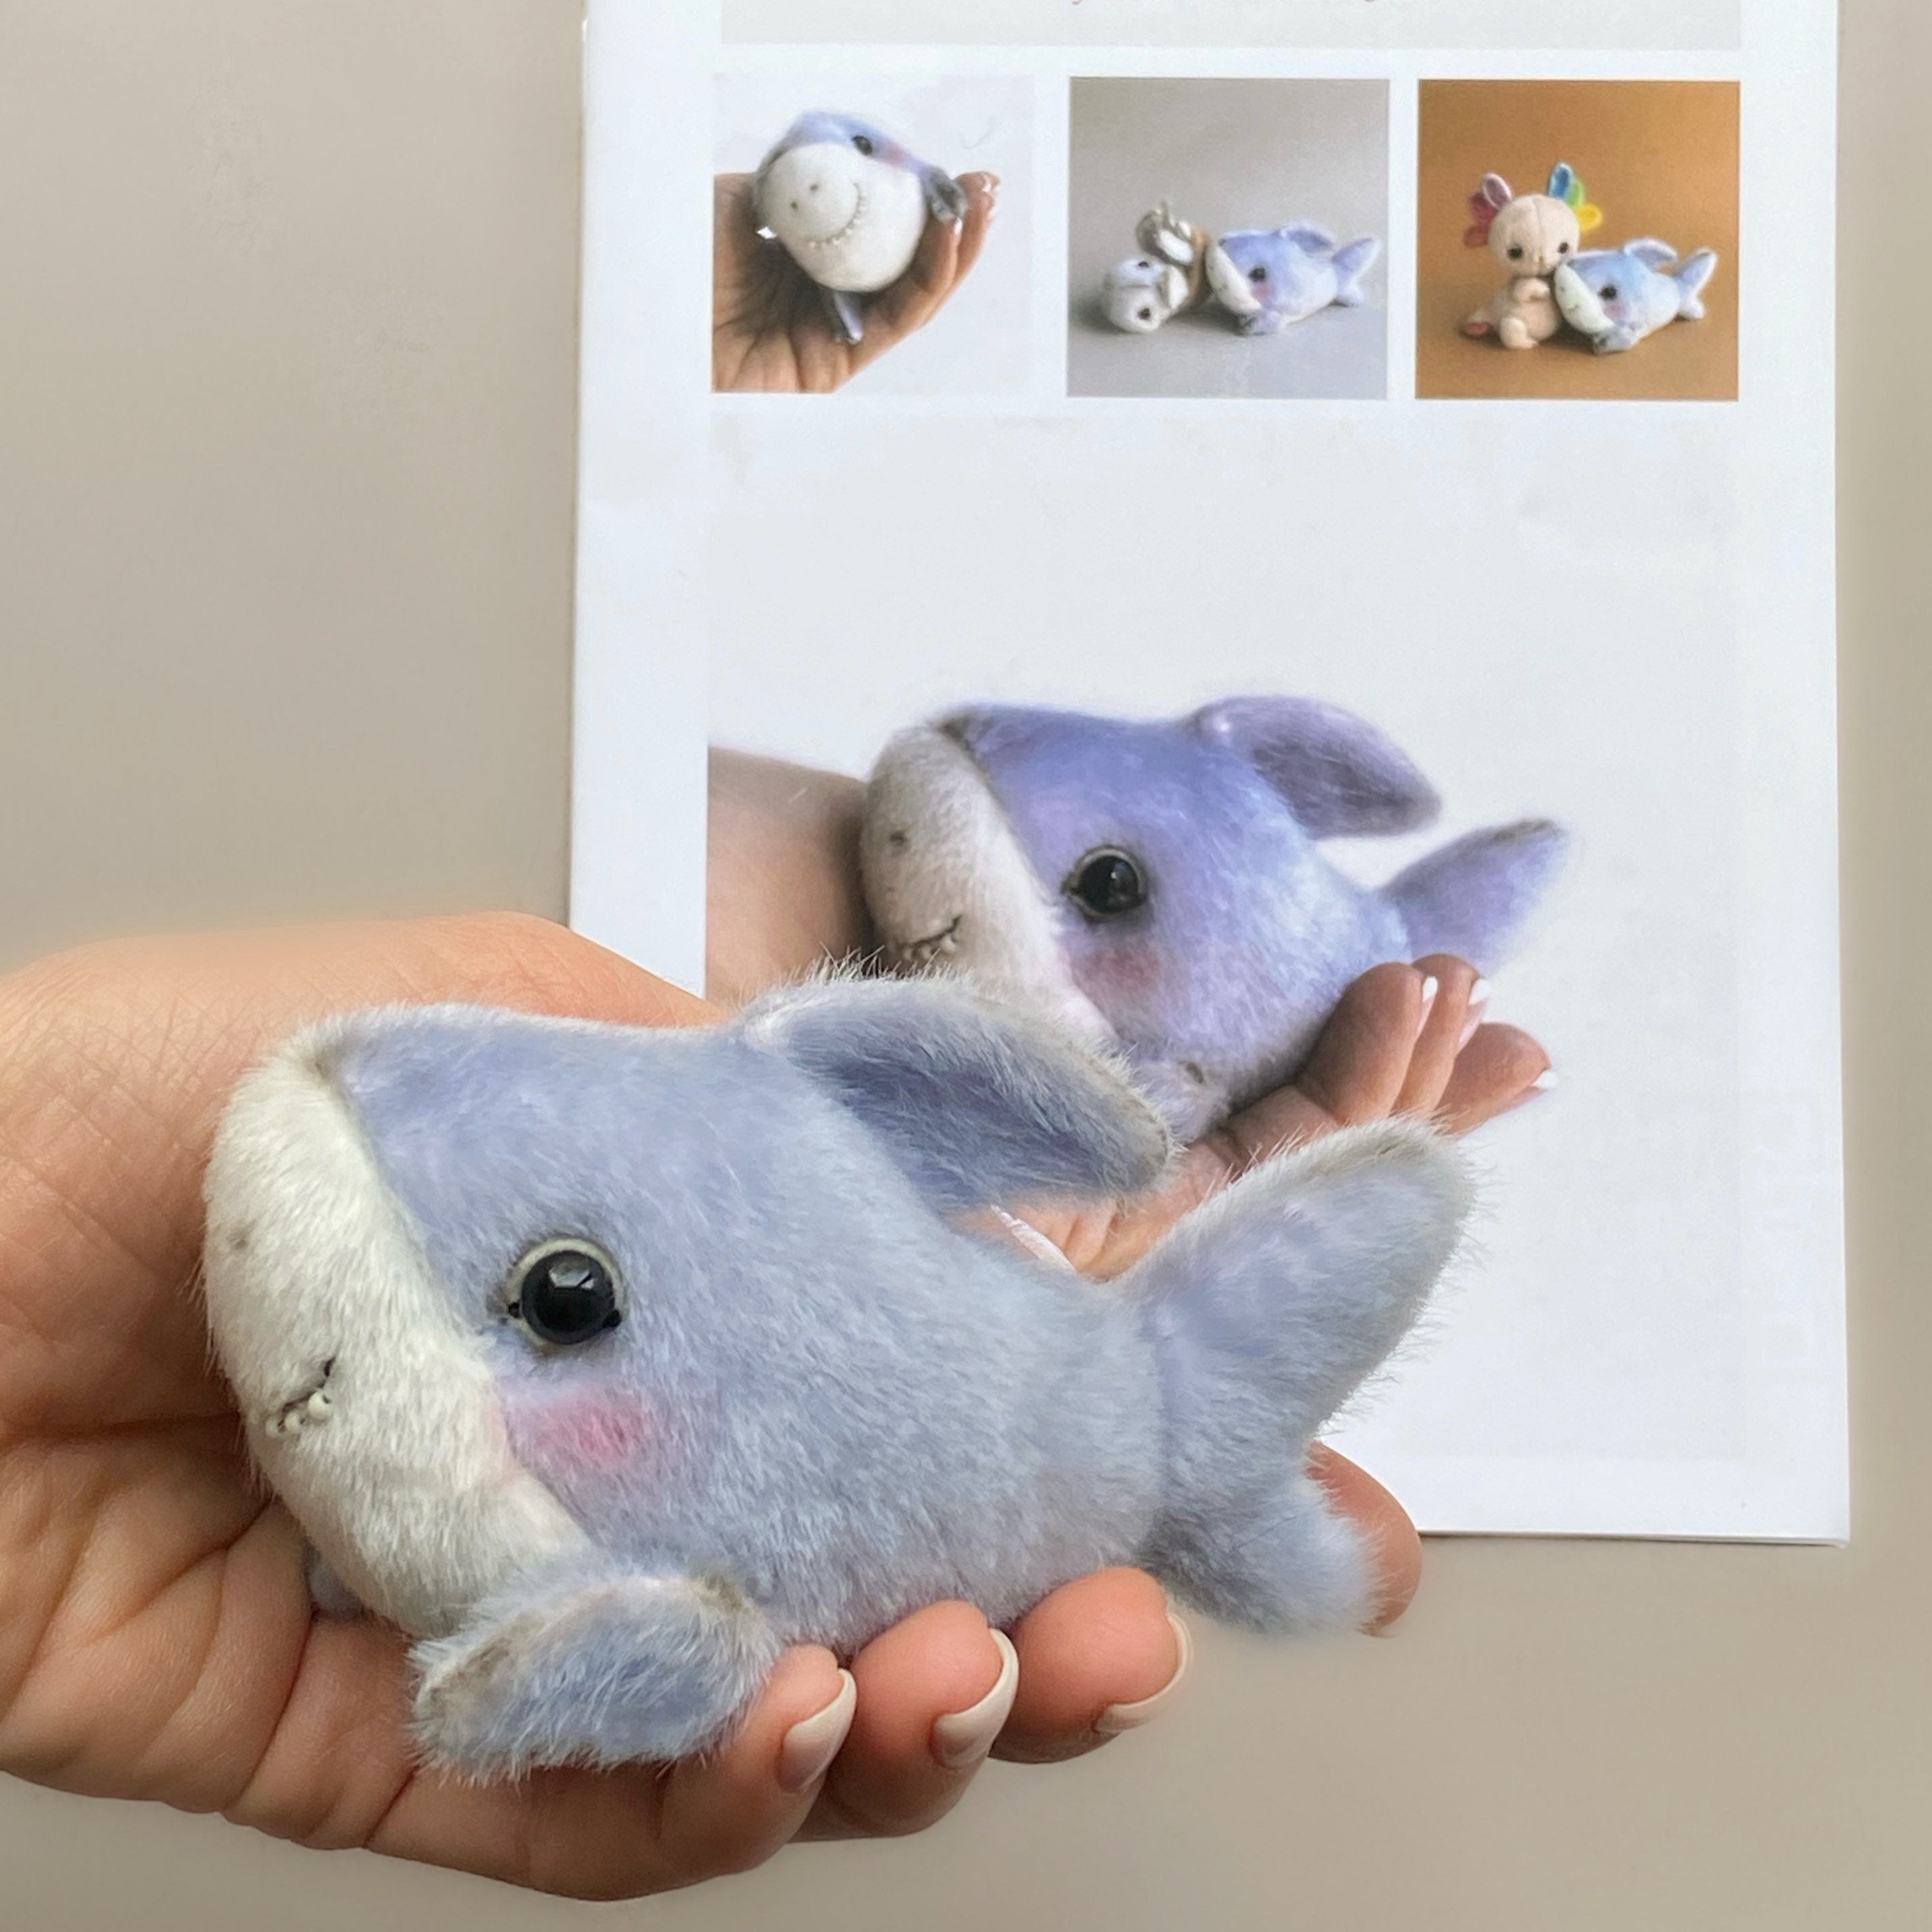 Shark - Sewing KIT, artist pattern, stuffed toy tutorials, sea animal, whale, dolphin soft toy diy craft kit for adults TSminibears